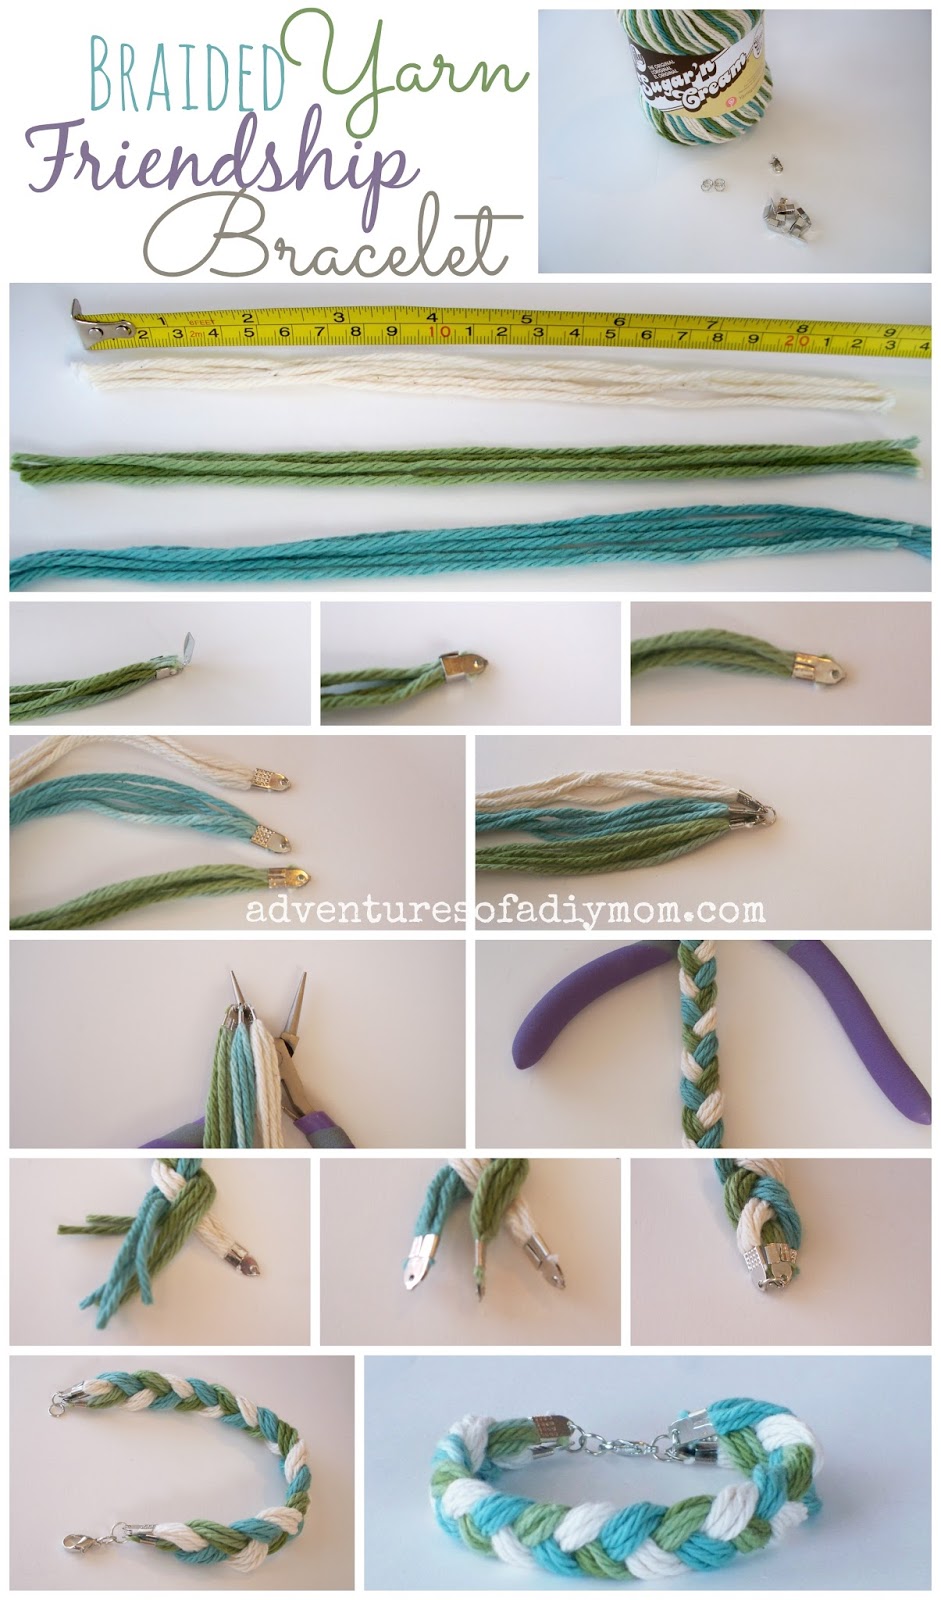 8 Strand Flat Braid - How Did You Make This? | Luxe DIY